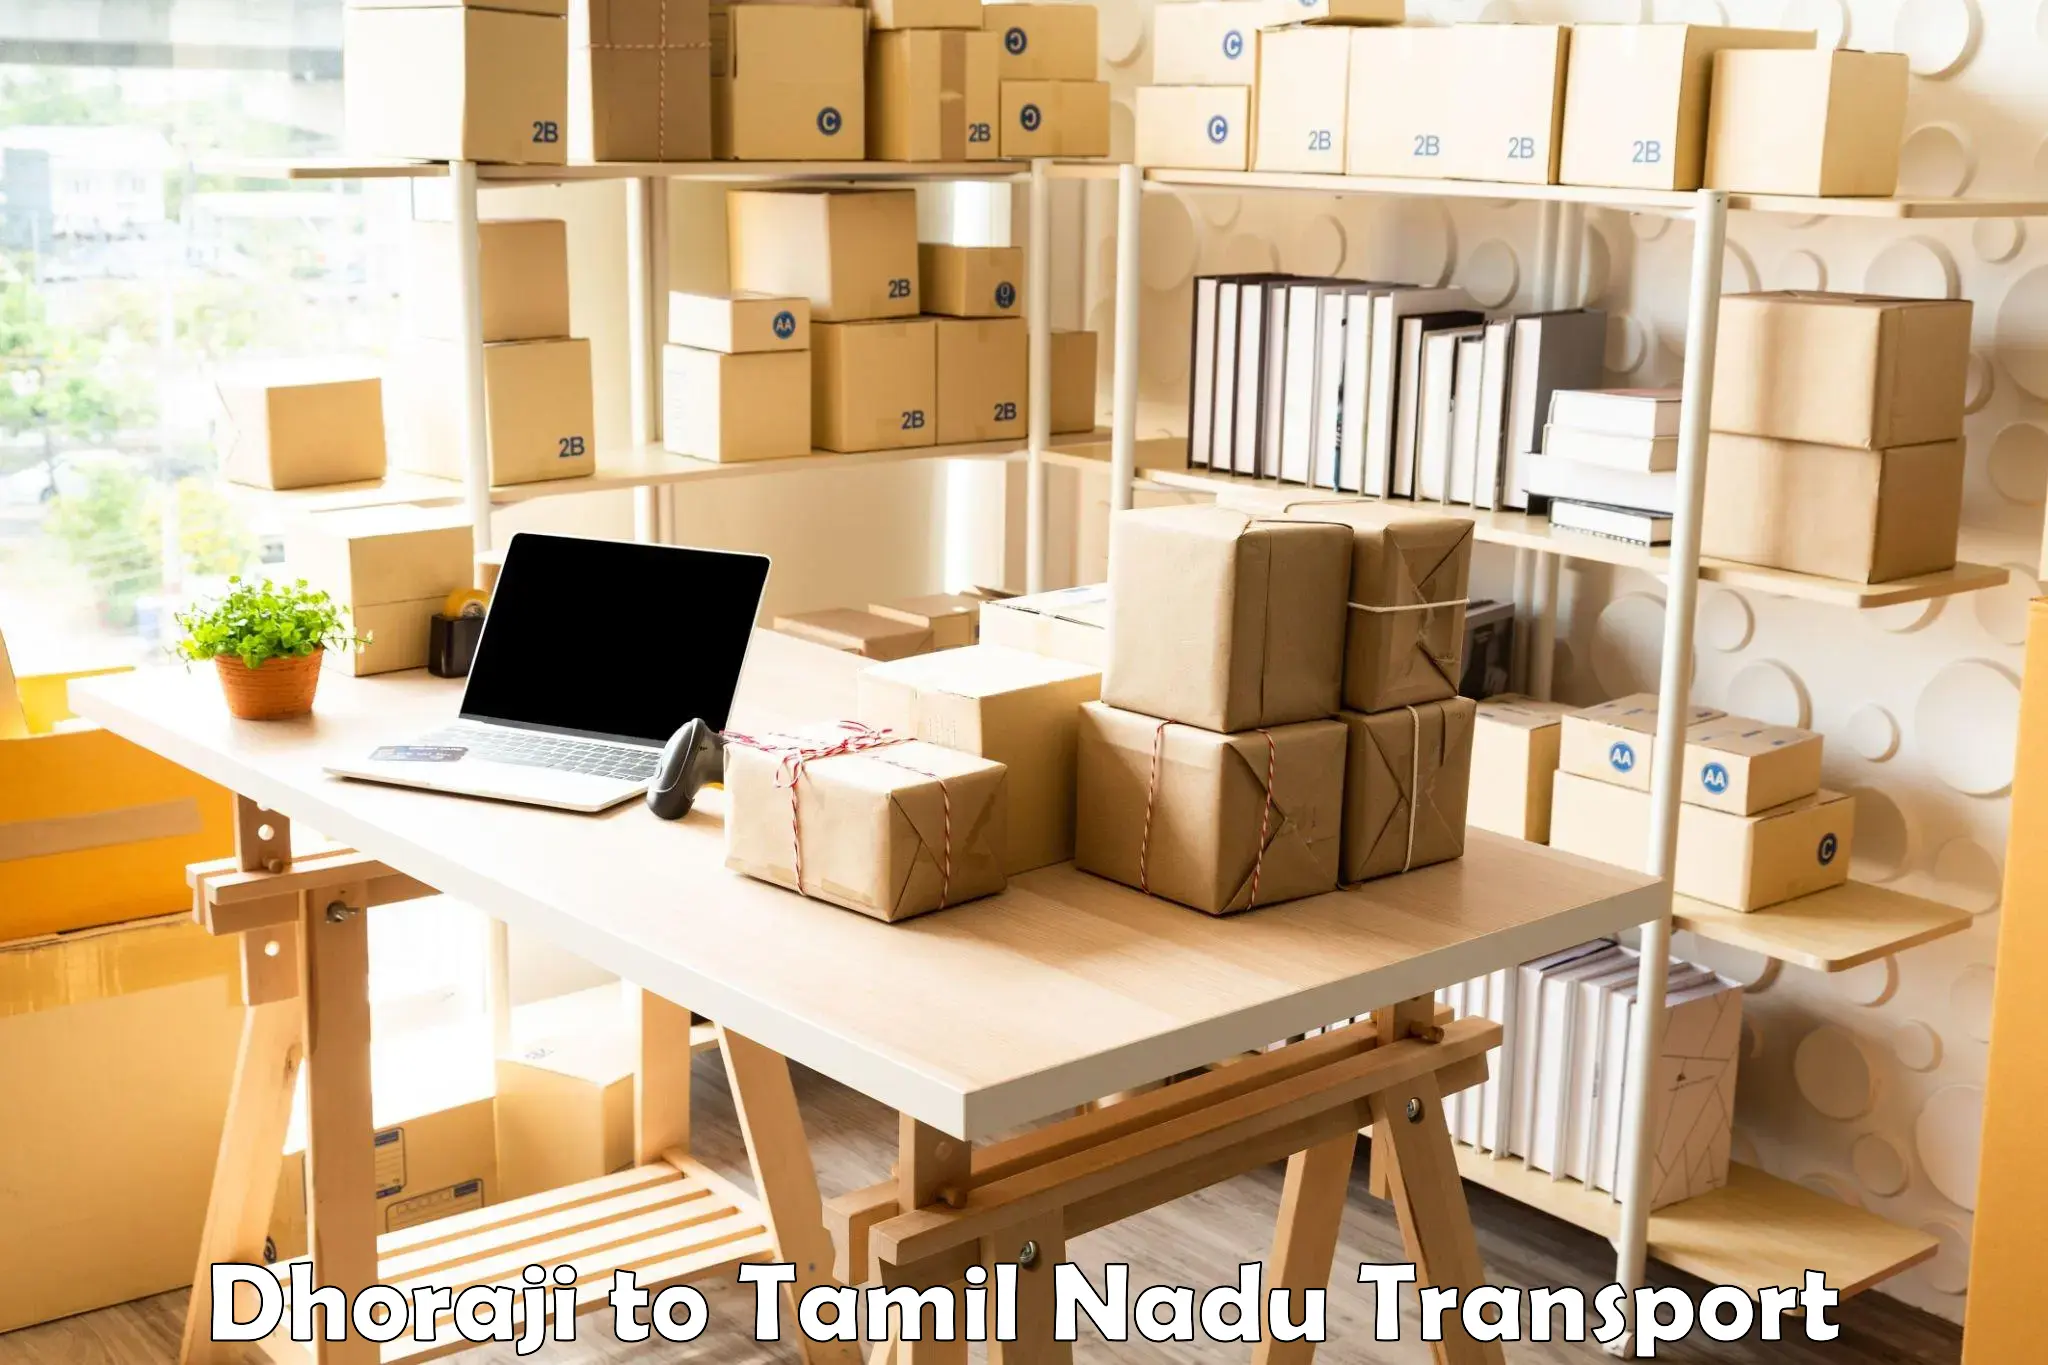 Land transport services Dhoraji to Meenakshi Academy of Higher Education and Research Chennai